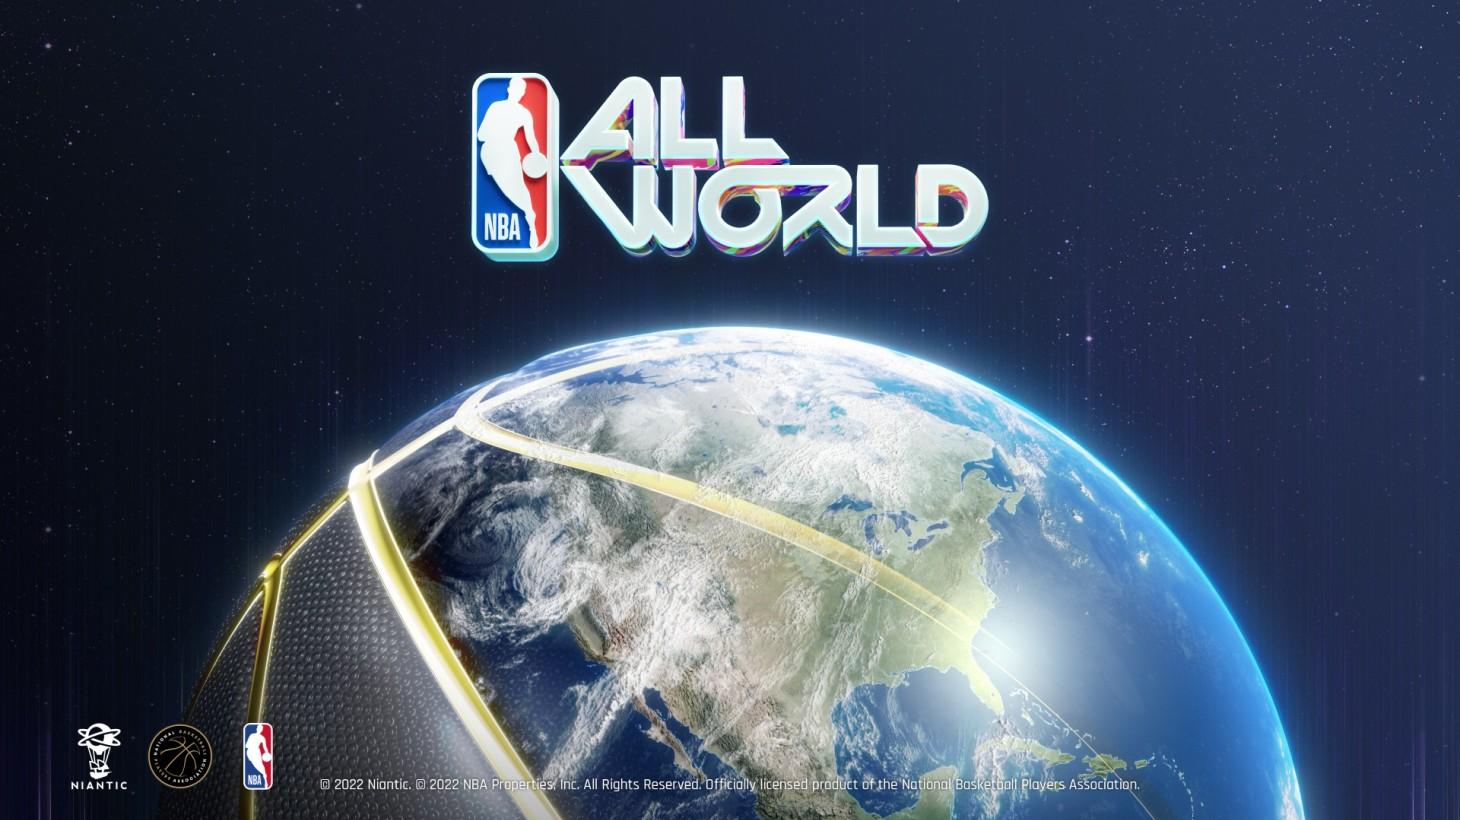 Nba All World From Pok Mon Go Studio Available Today Game Informer